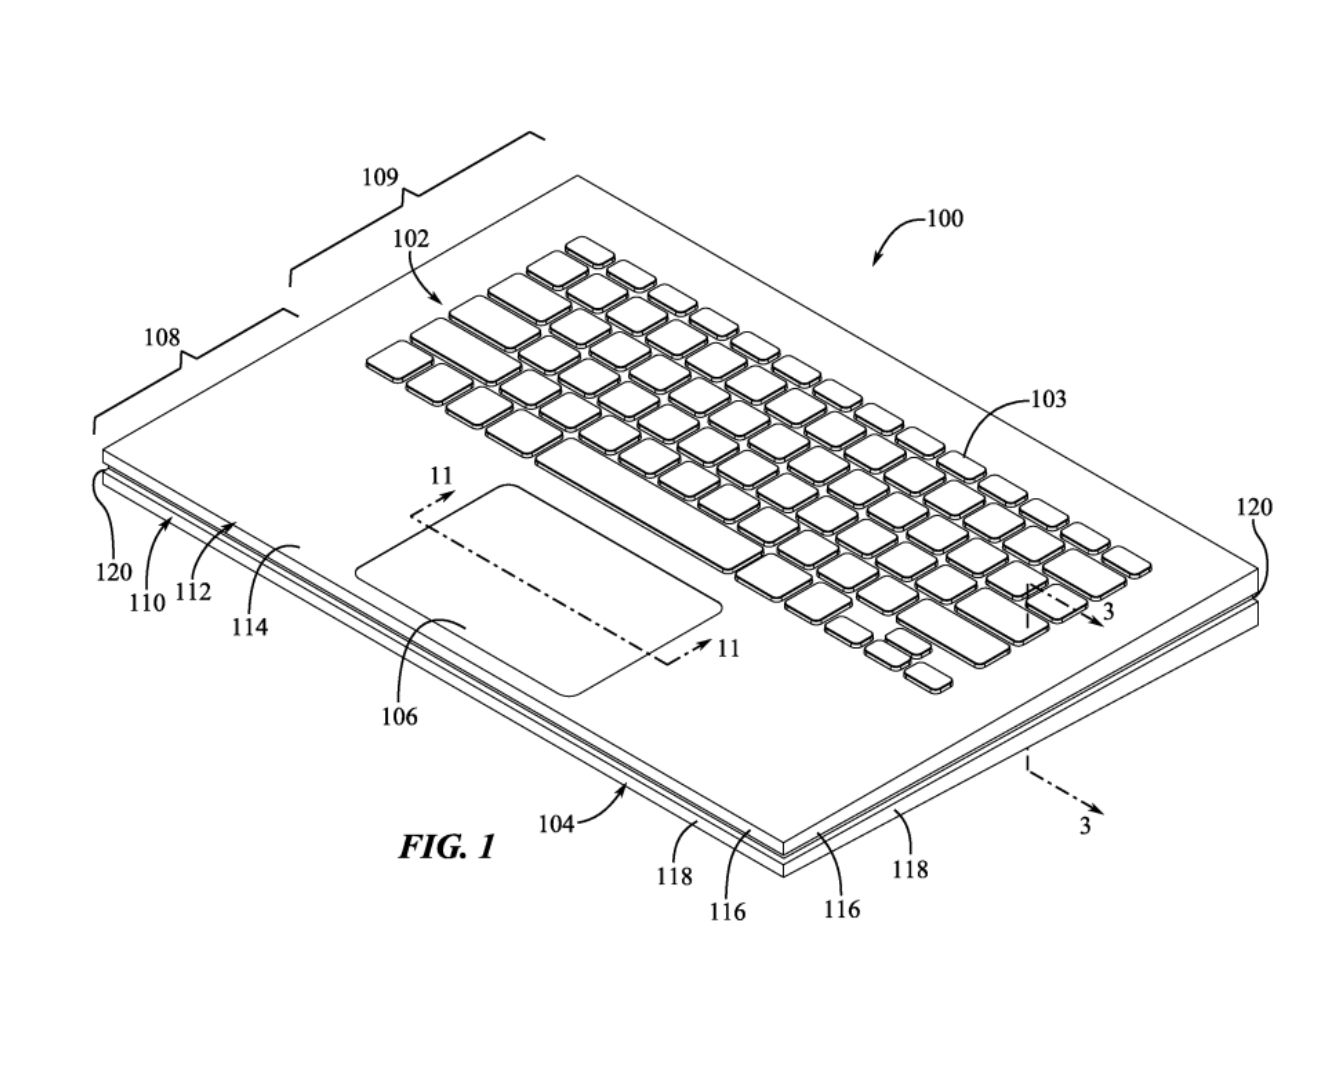 Apple's new patent suggests new tech on the horizon